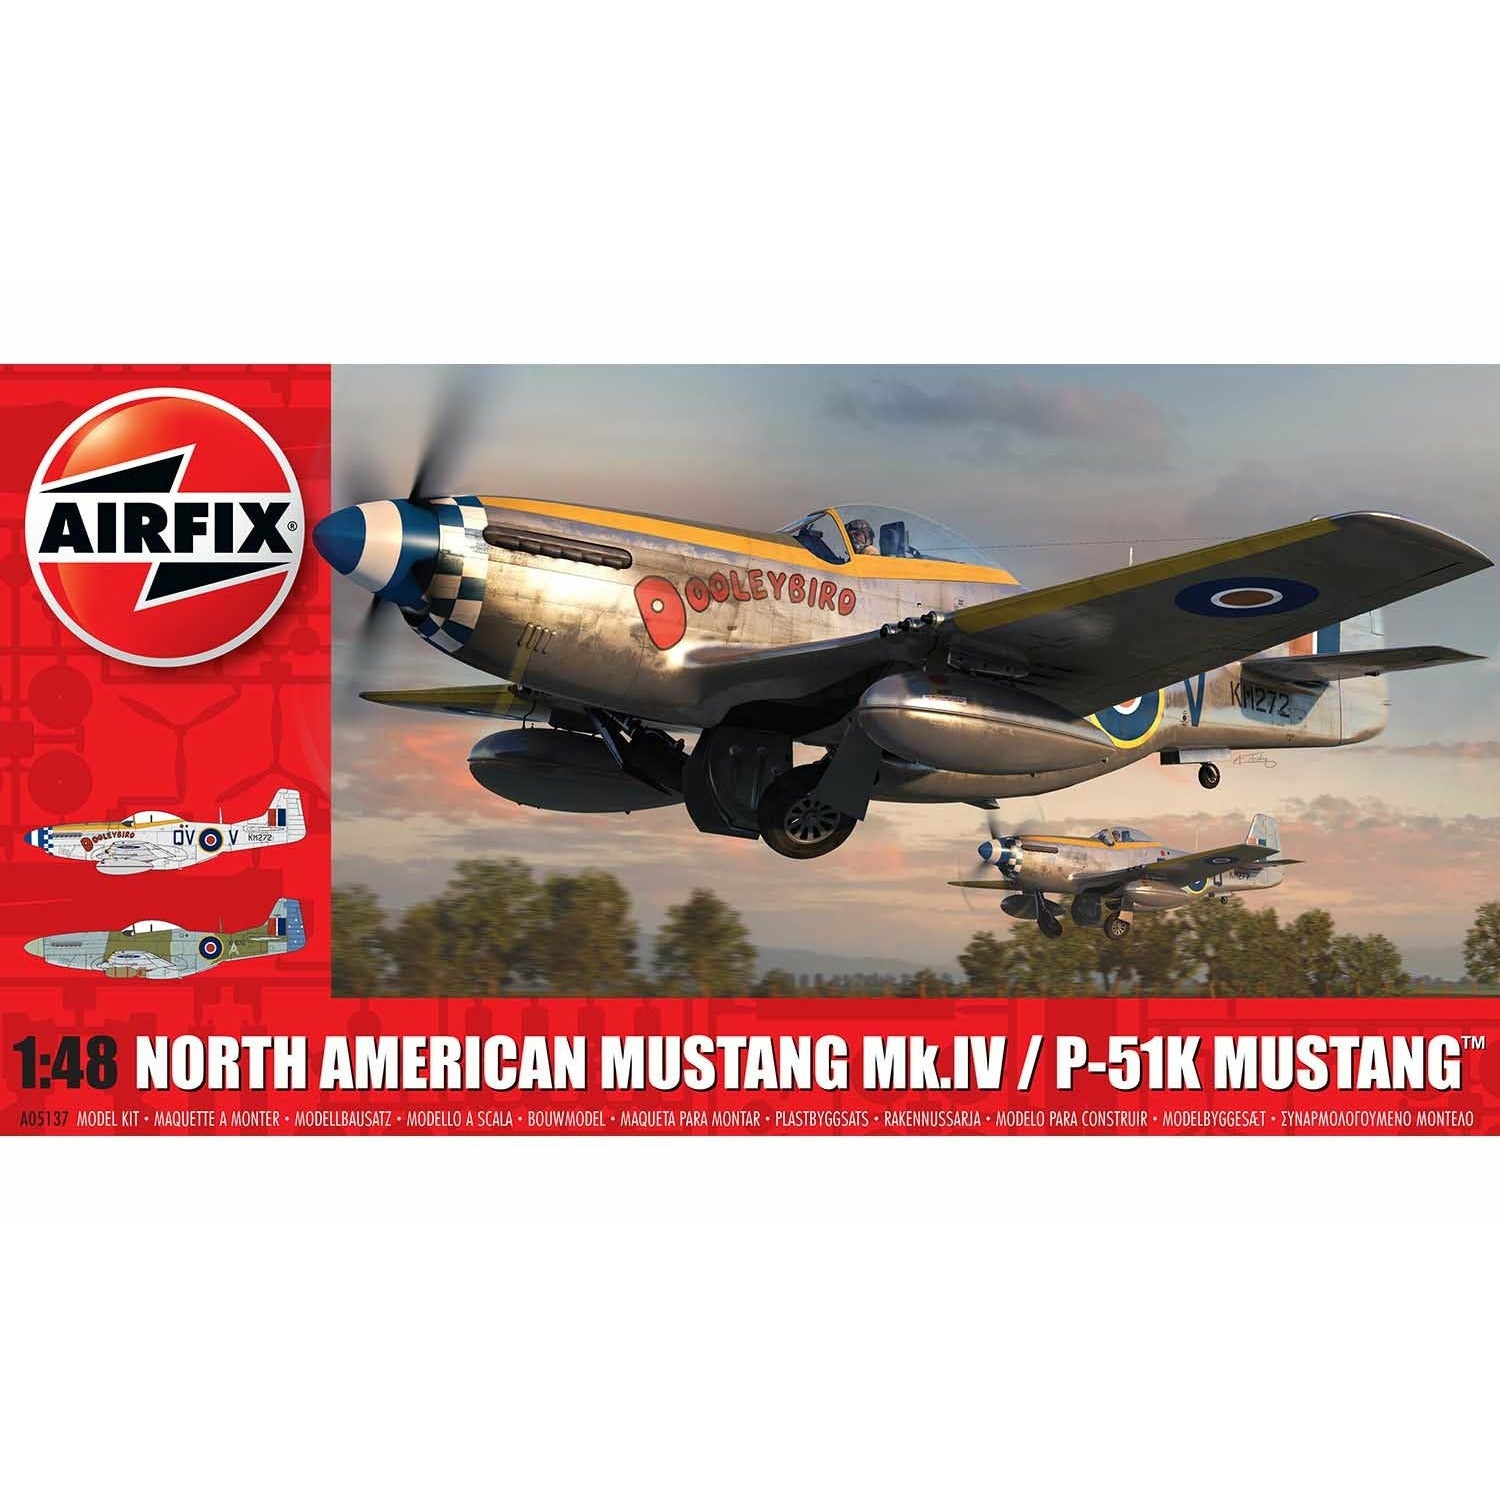 North American Mustang IV 1/48 #05137 by Airfix